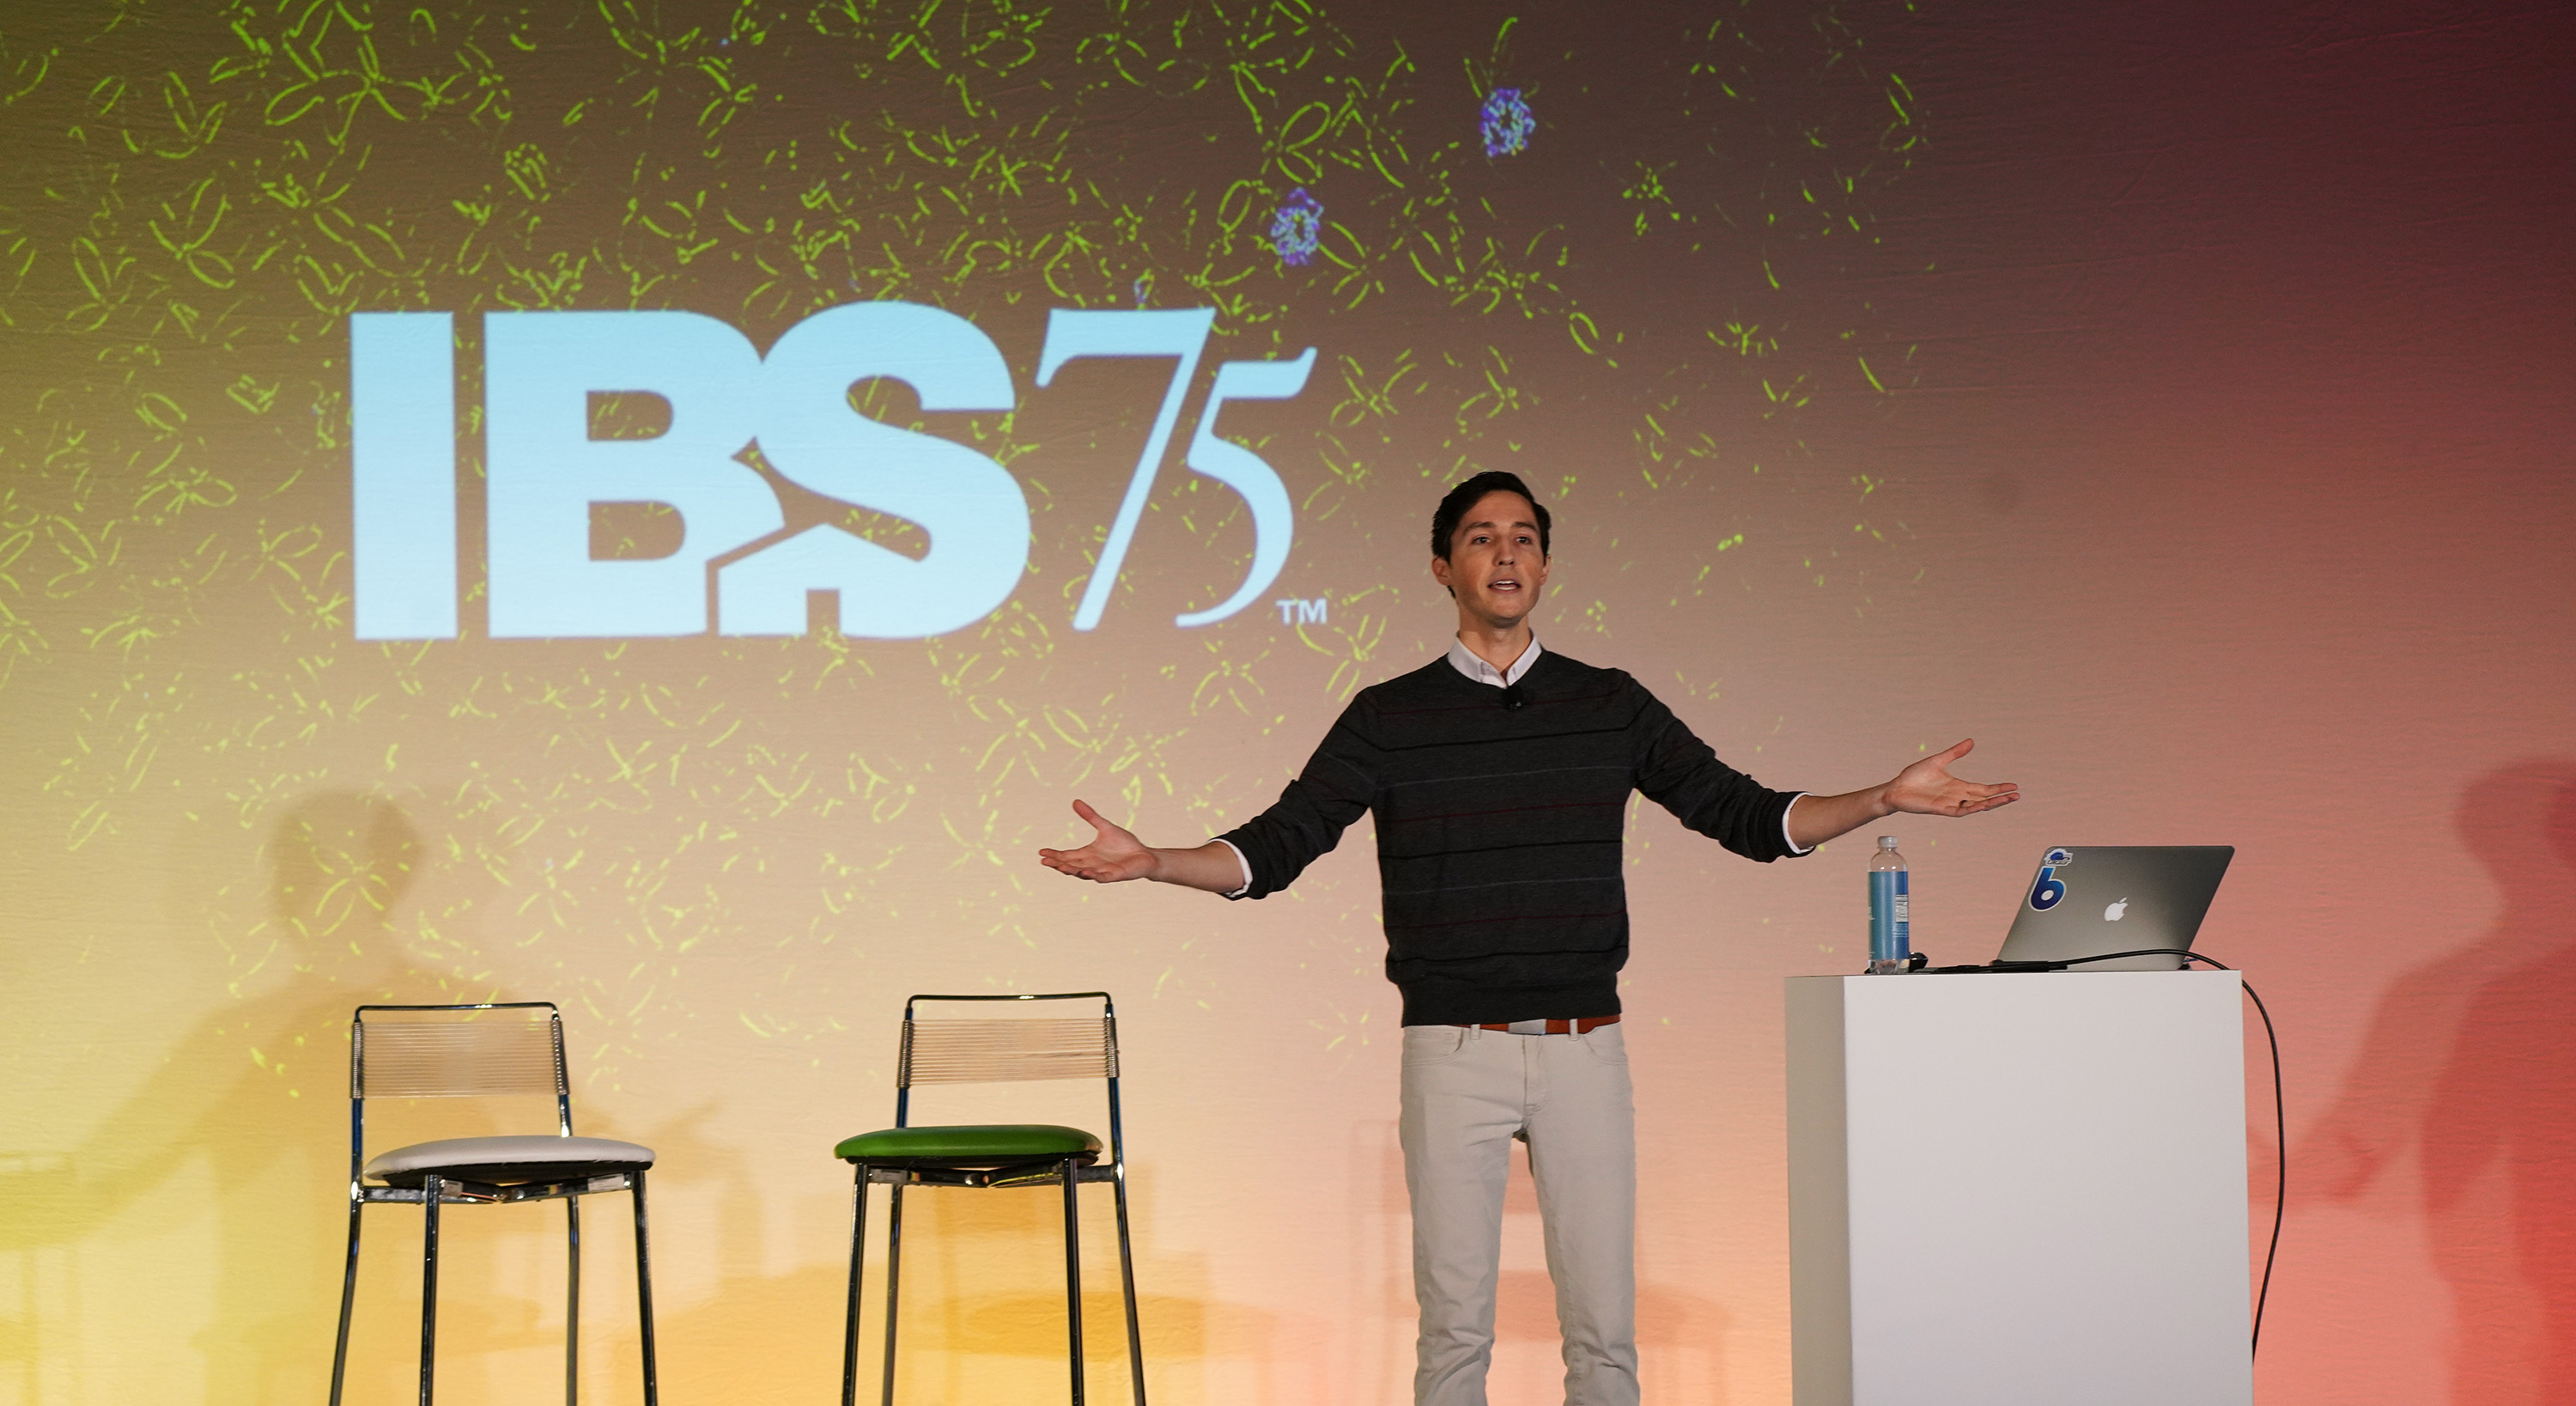 Andrew Garberson presenting at IBS Summit 2019